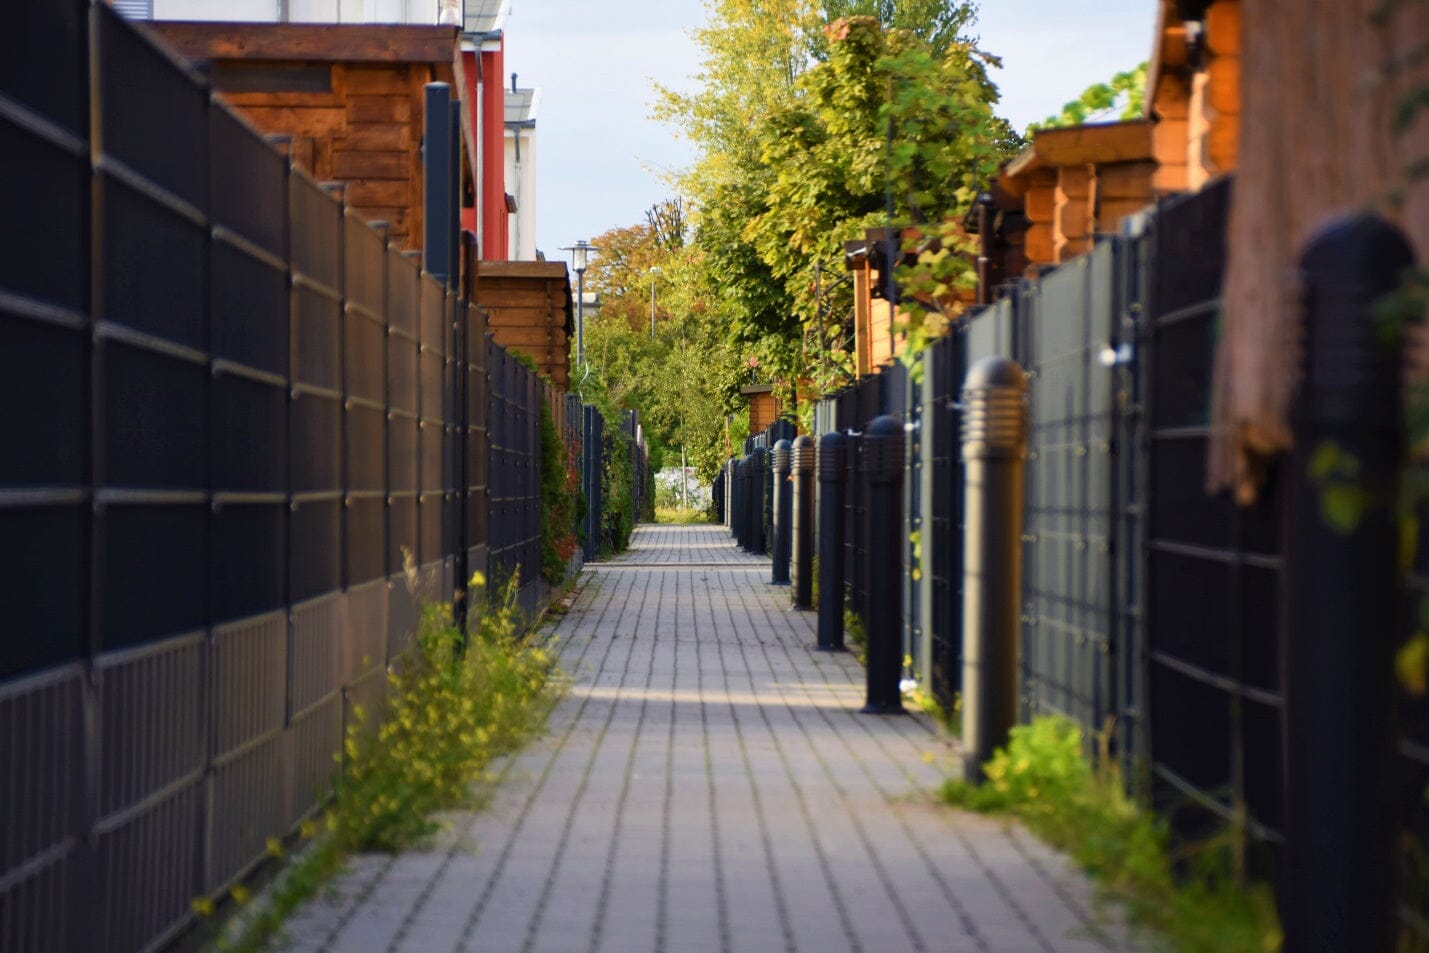 Choosing The Right Fence For A Residential Development